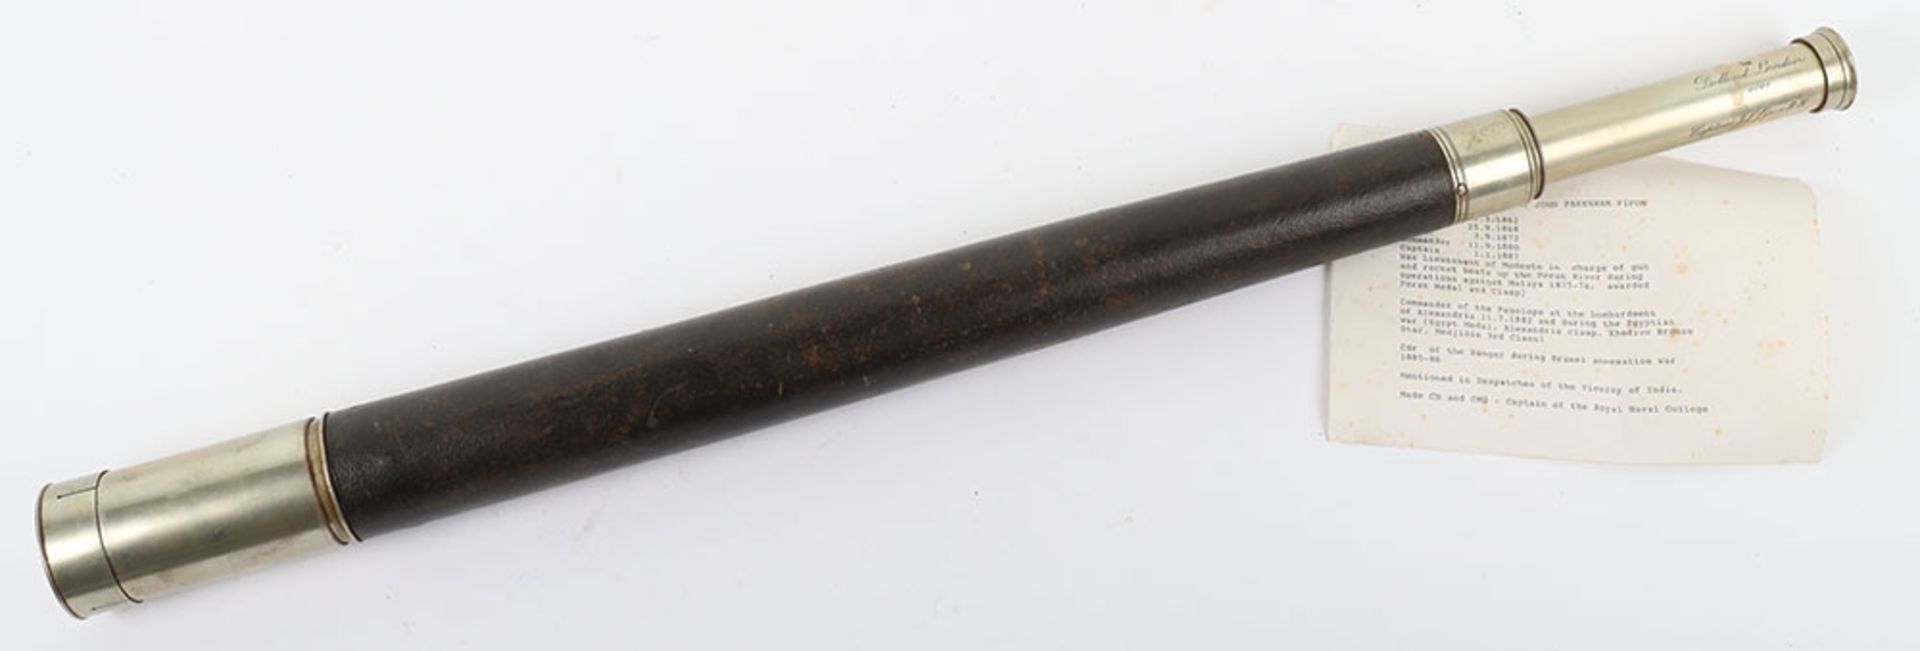 A 19th century Royal Navy Officers telescope by Dollond, London belonging to ‘J.P. Pipon R.N’